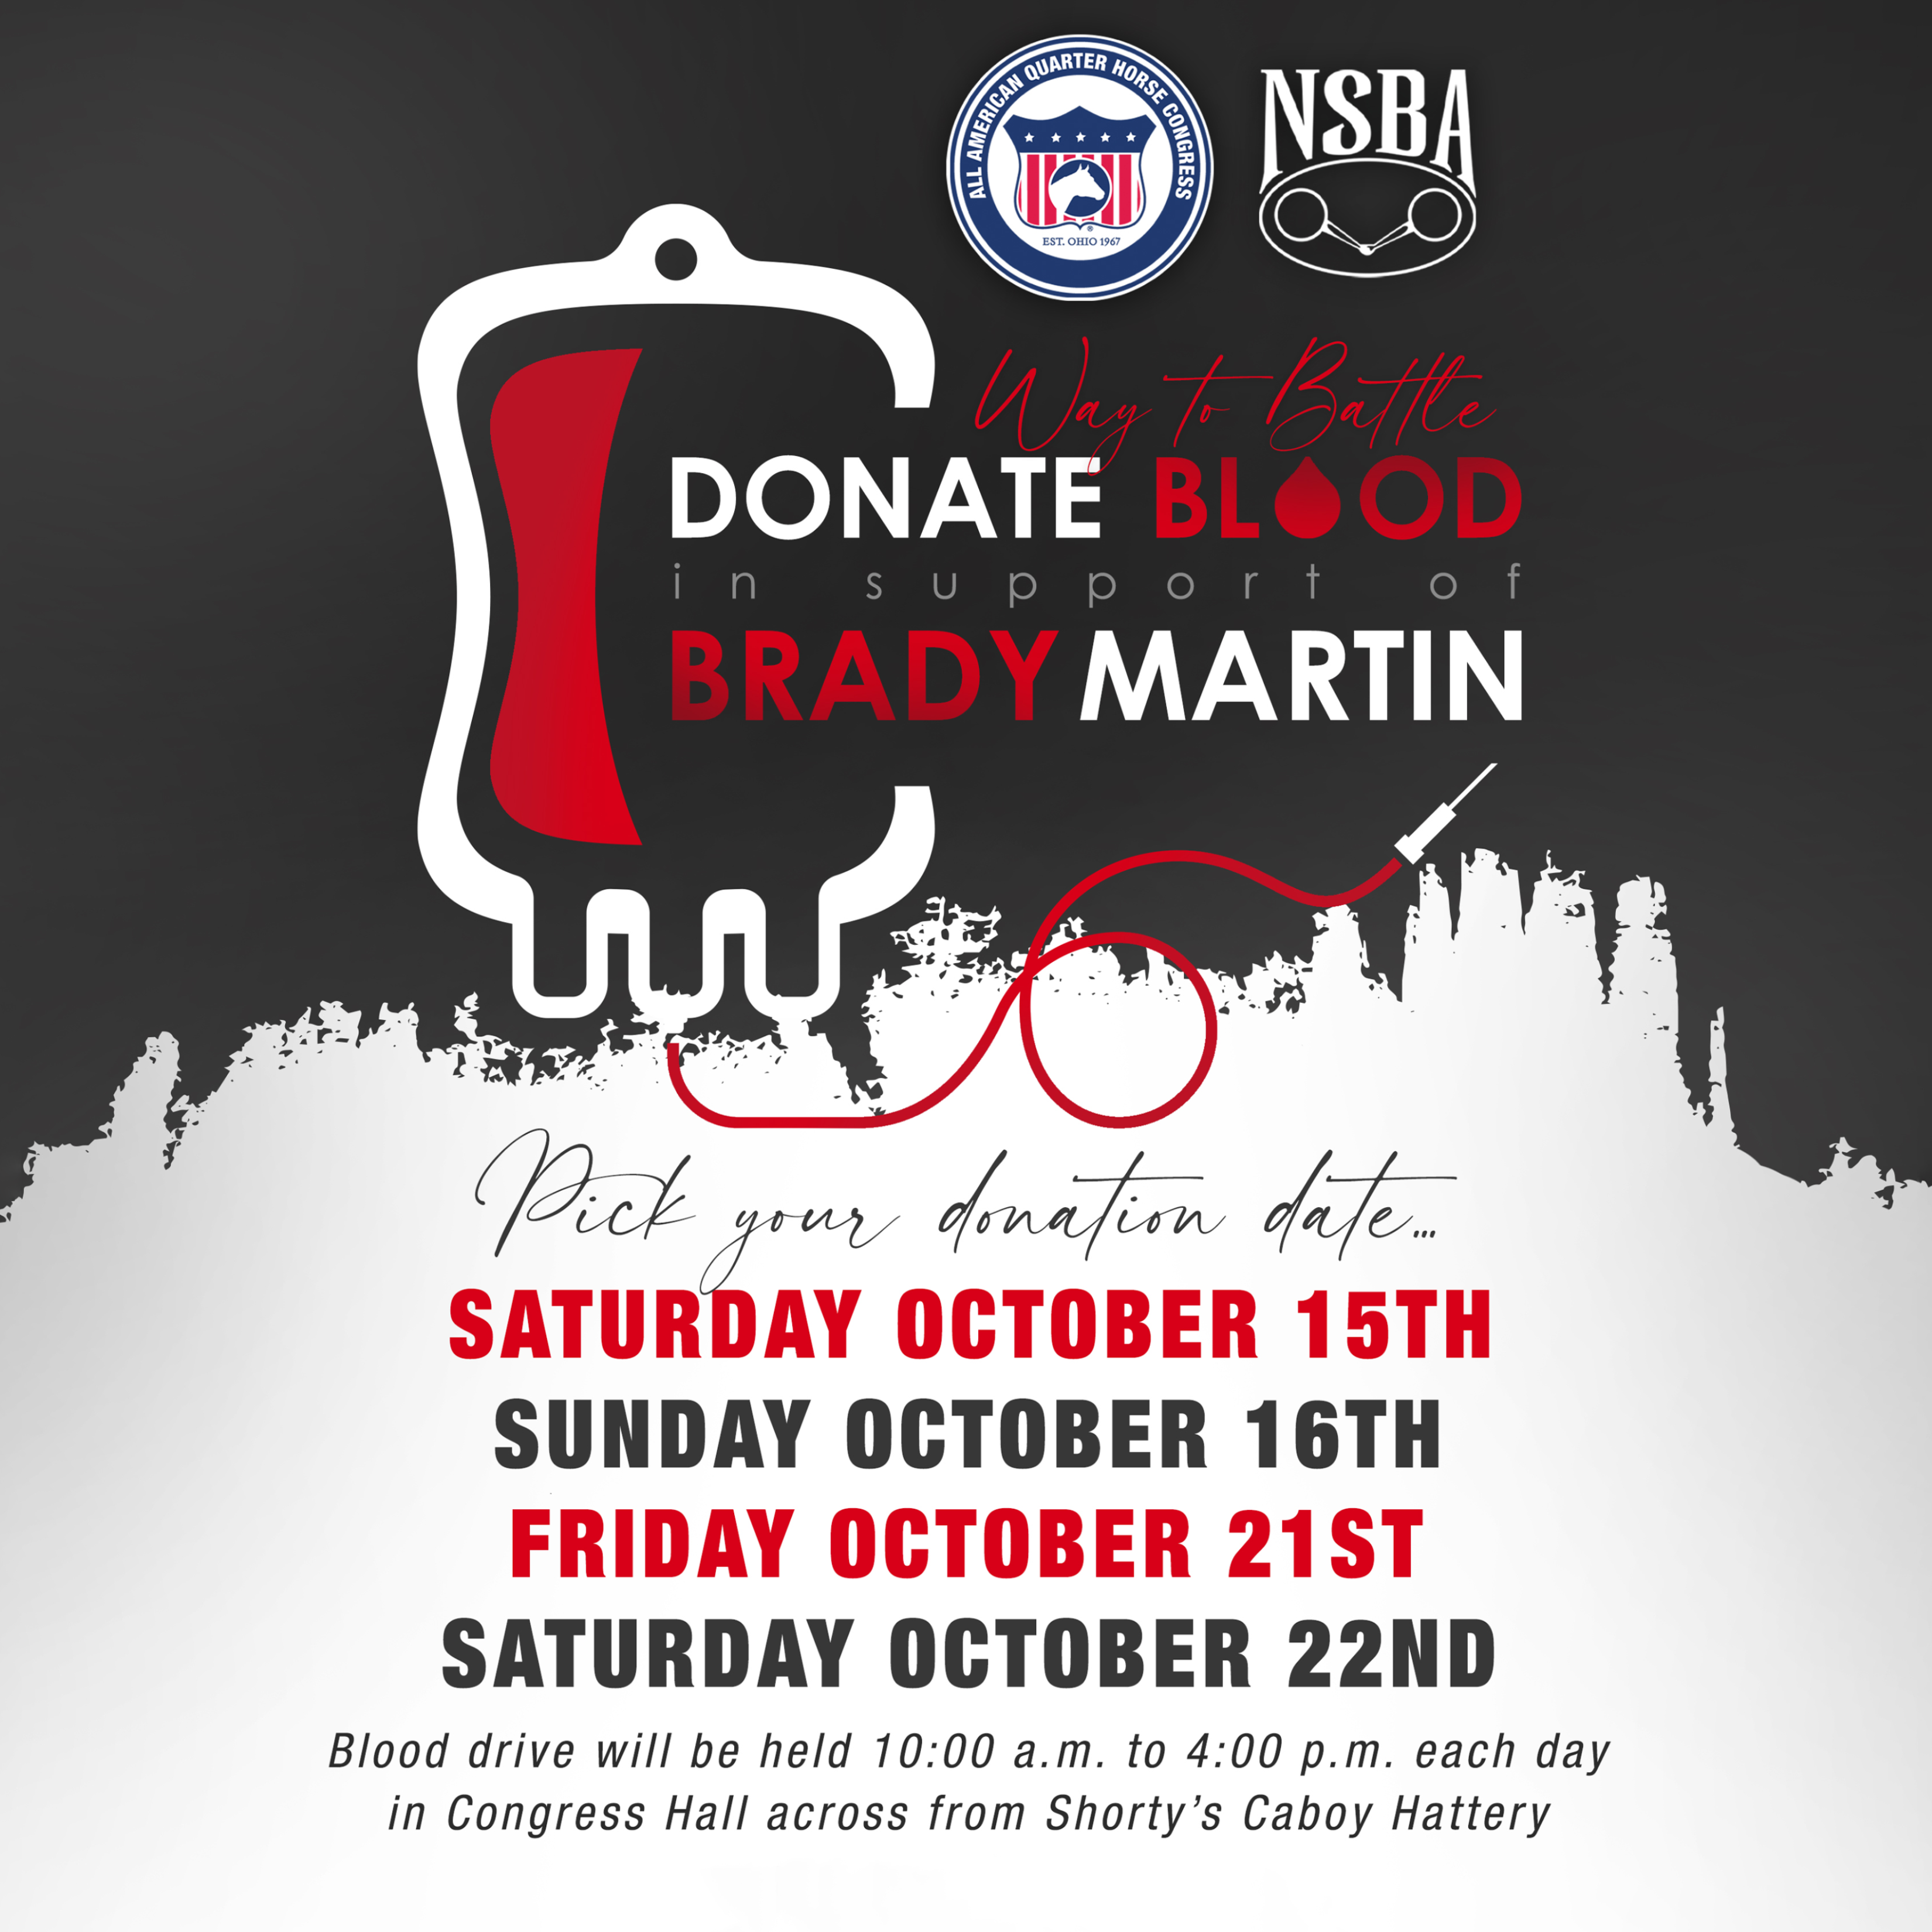 Way to Battle: Donate Blood in Support of Brady Martin